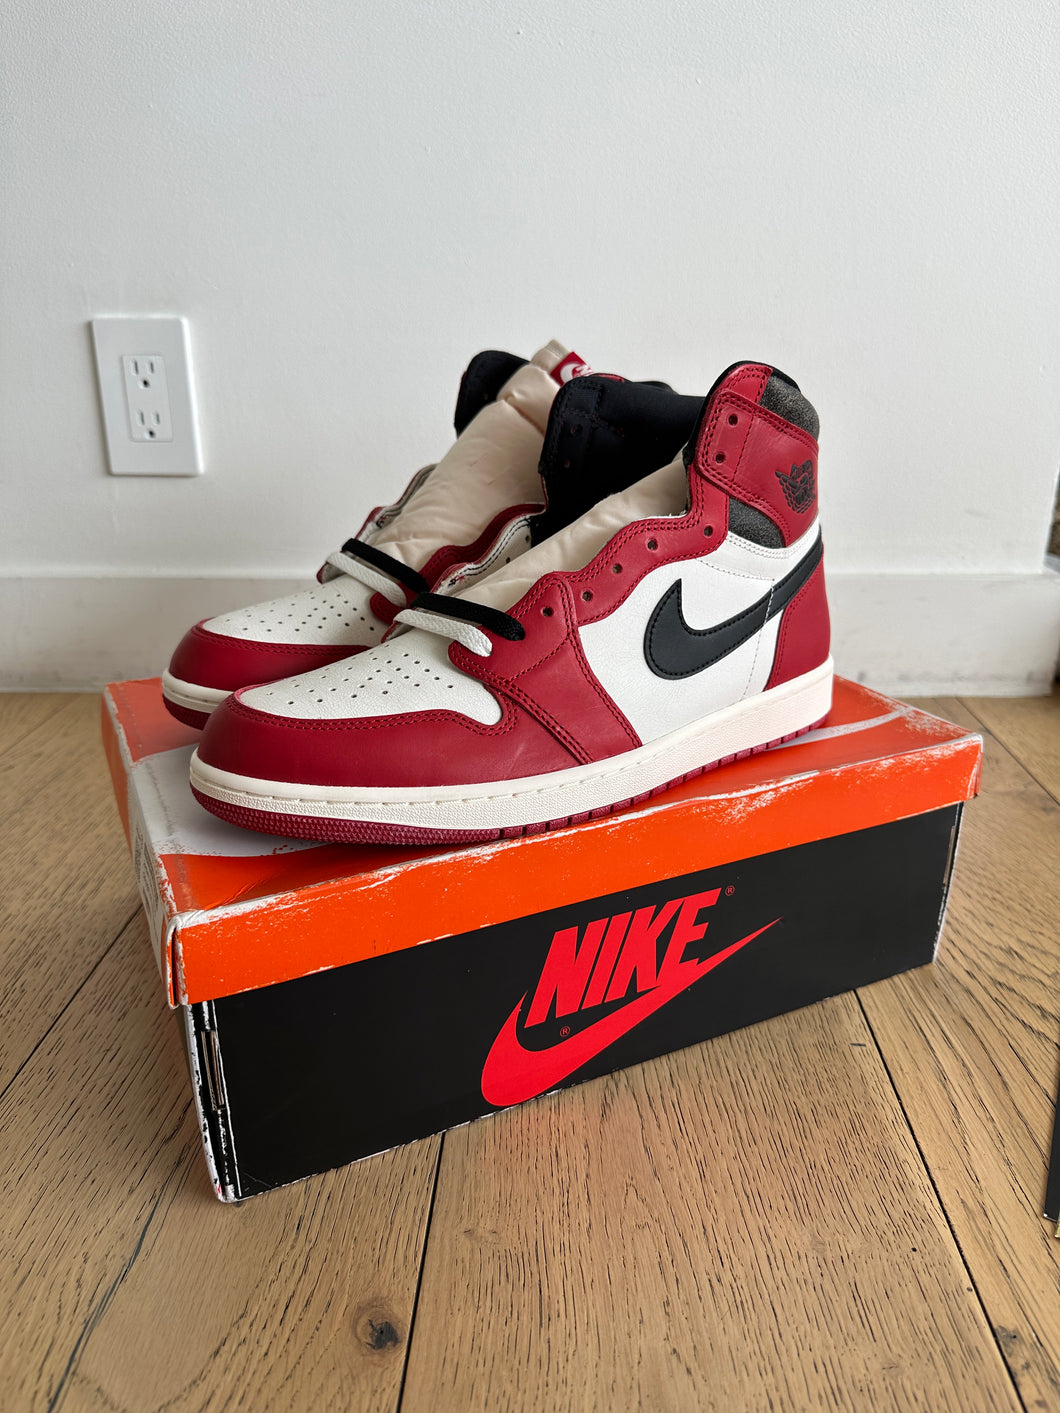 Jordan 1 Chicago Lost and Found Sz 12